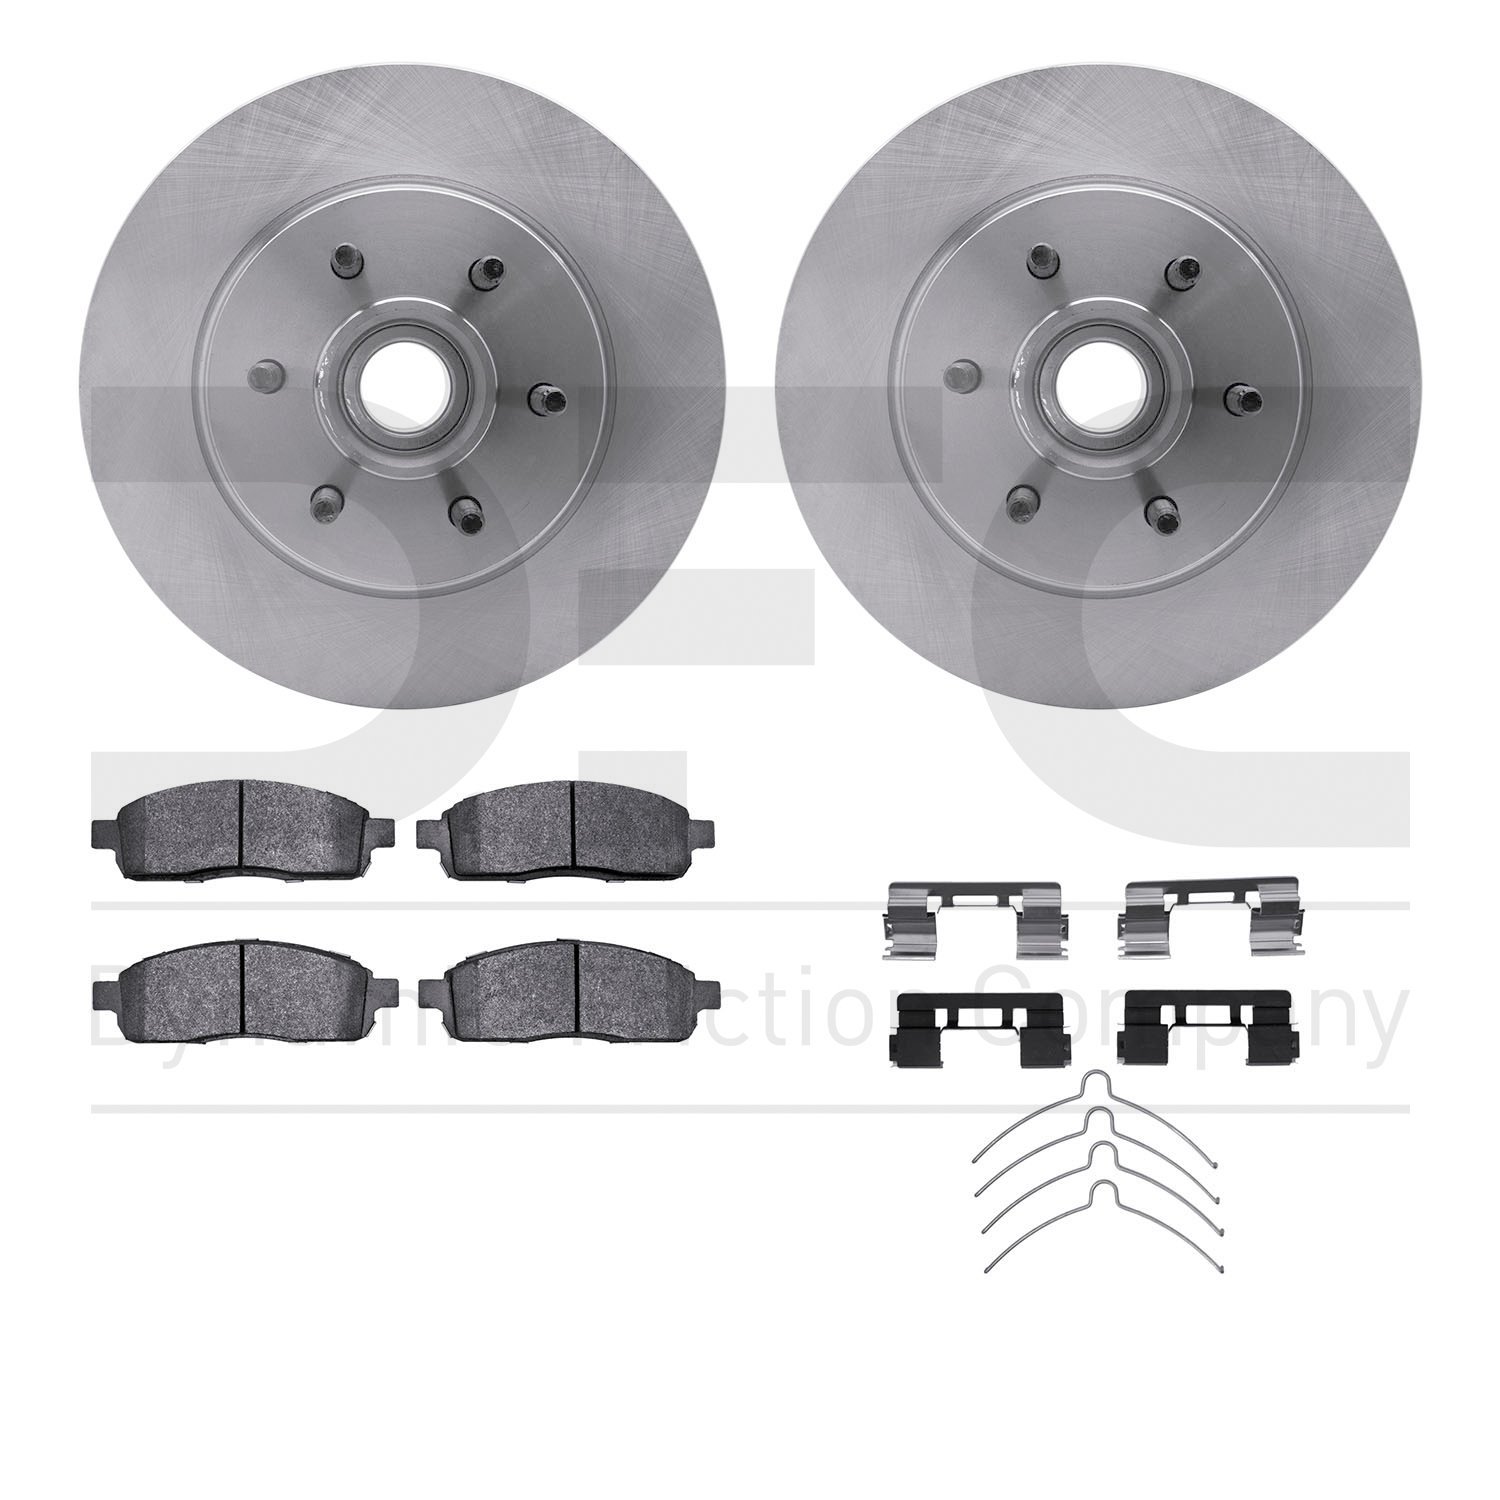 6412-54209 Brake Rotors with Ultimate-Duty Brake Pads Kit & Hardware, 2004-2008 Ford/Lincoln/Mercury/Mazda, Position: Front